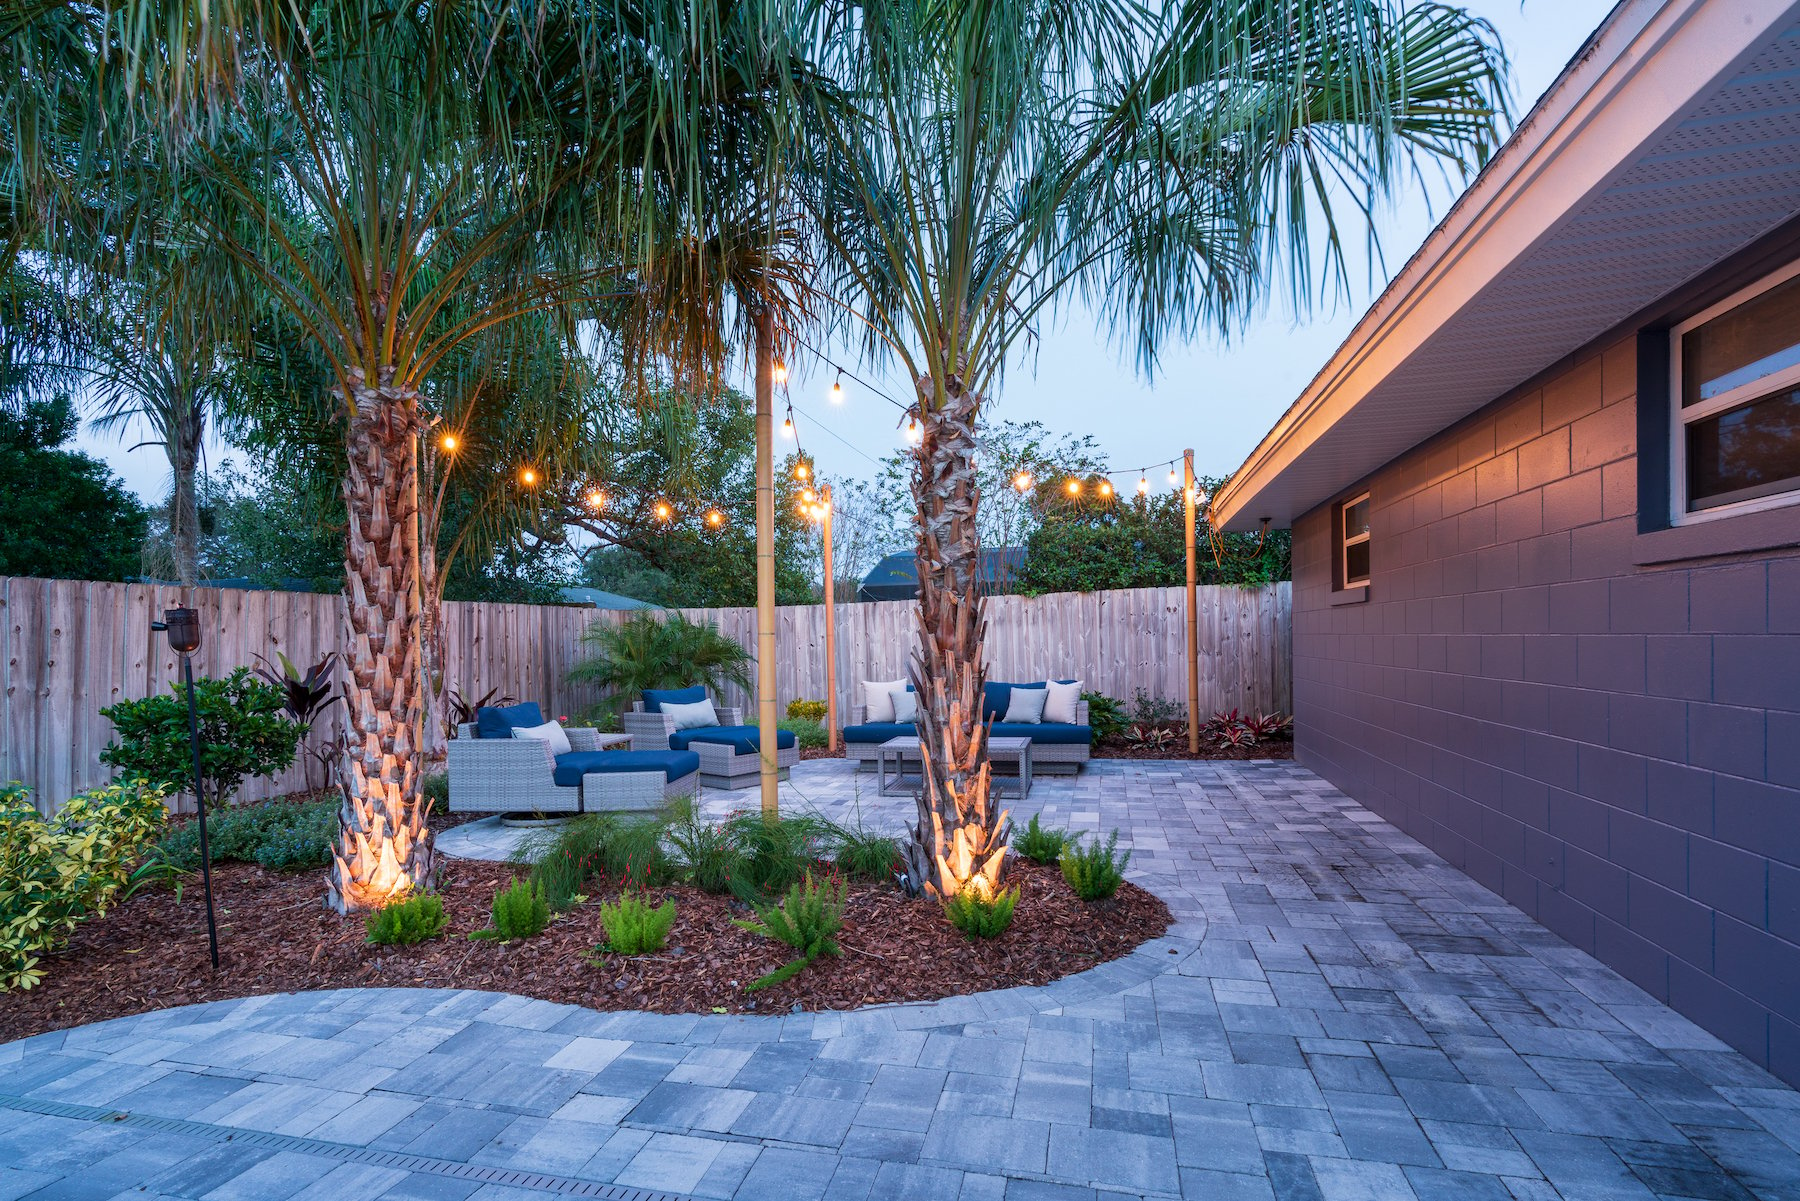 landscape lighting on trees in small backyard with patio and plantings